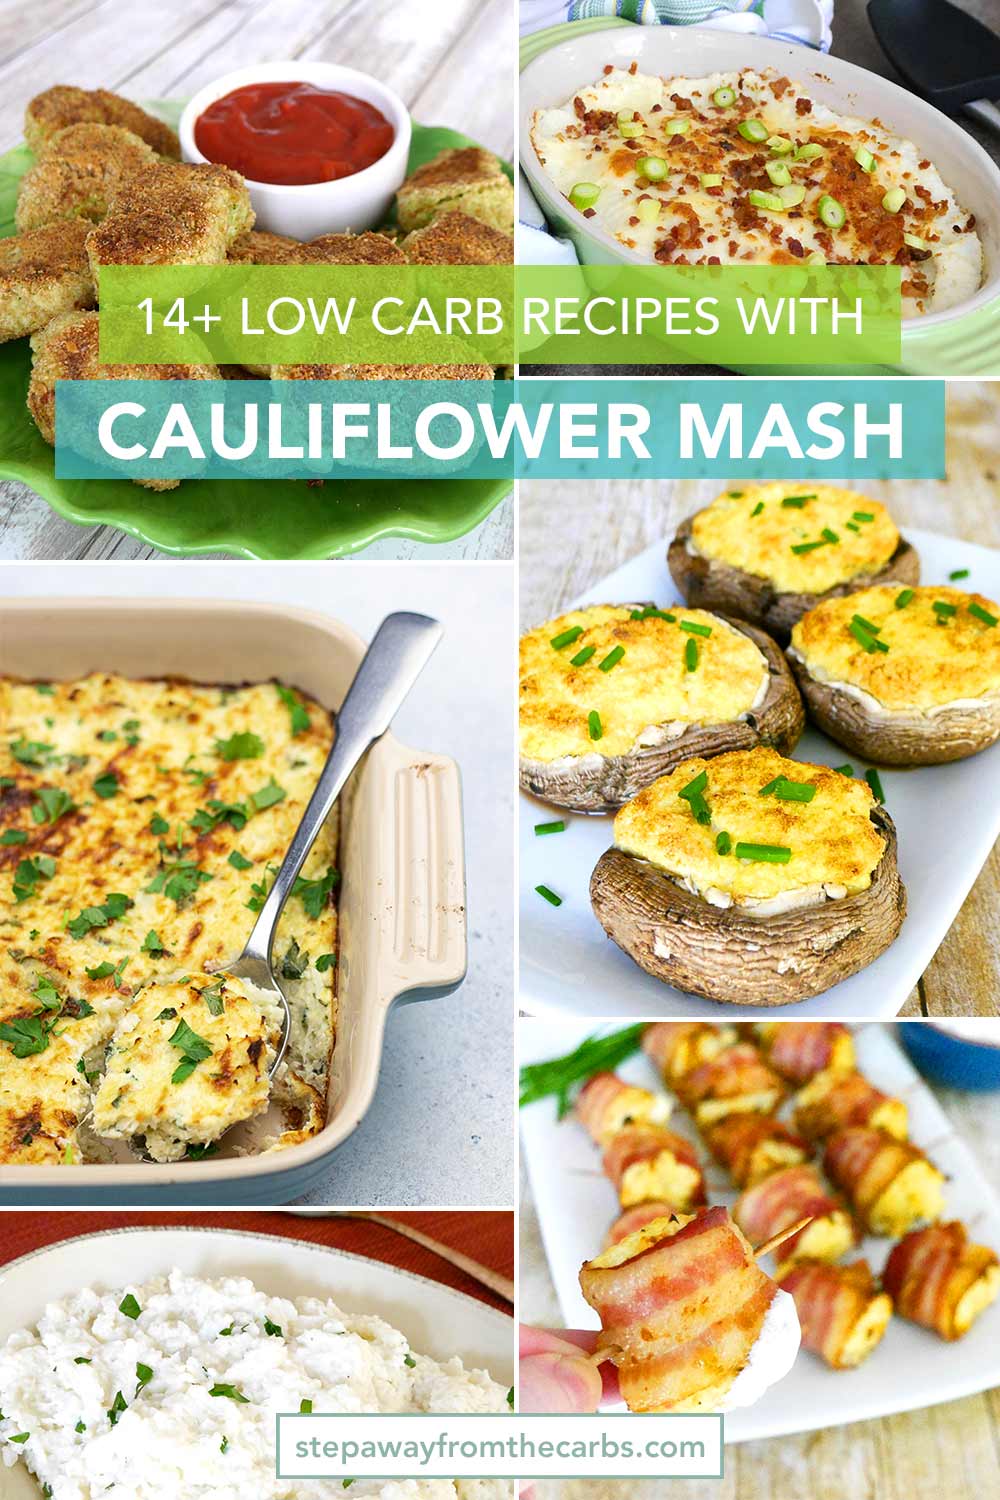 14+ Low Carb Recipes with Cauliflower Mash